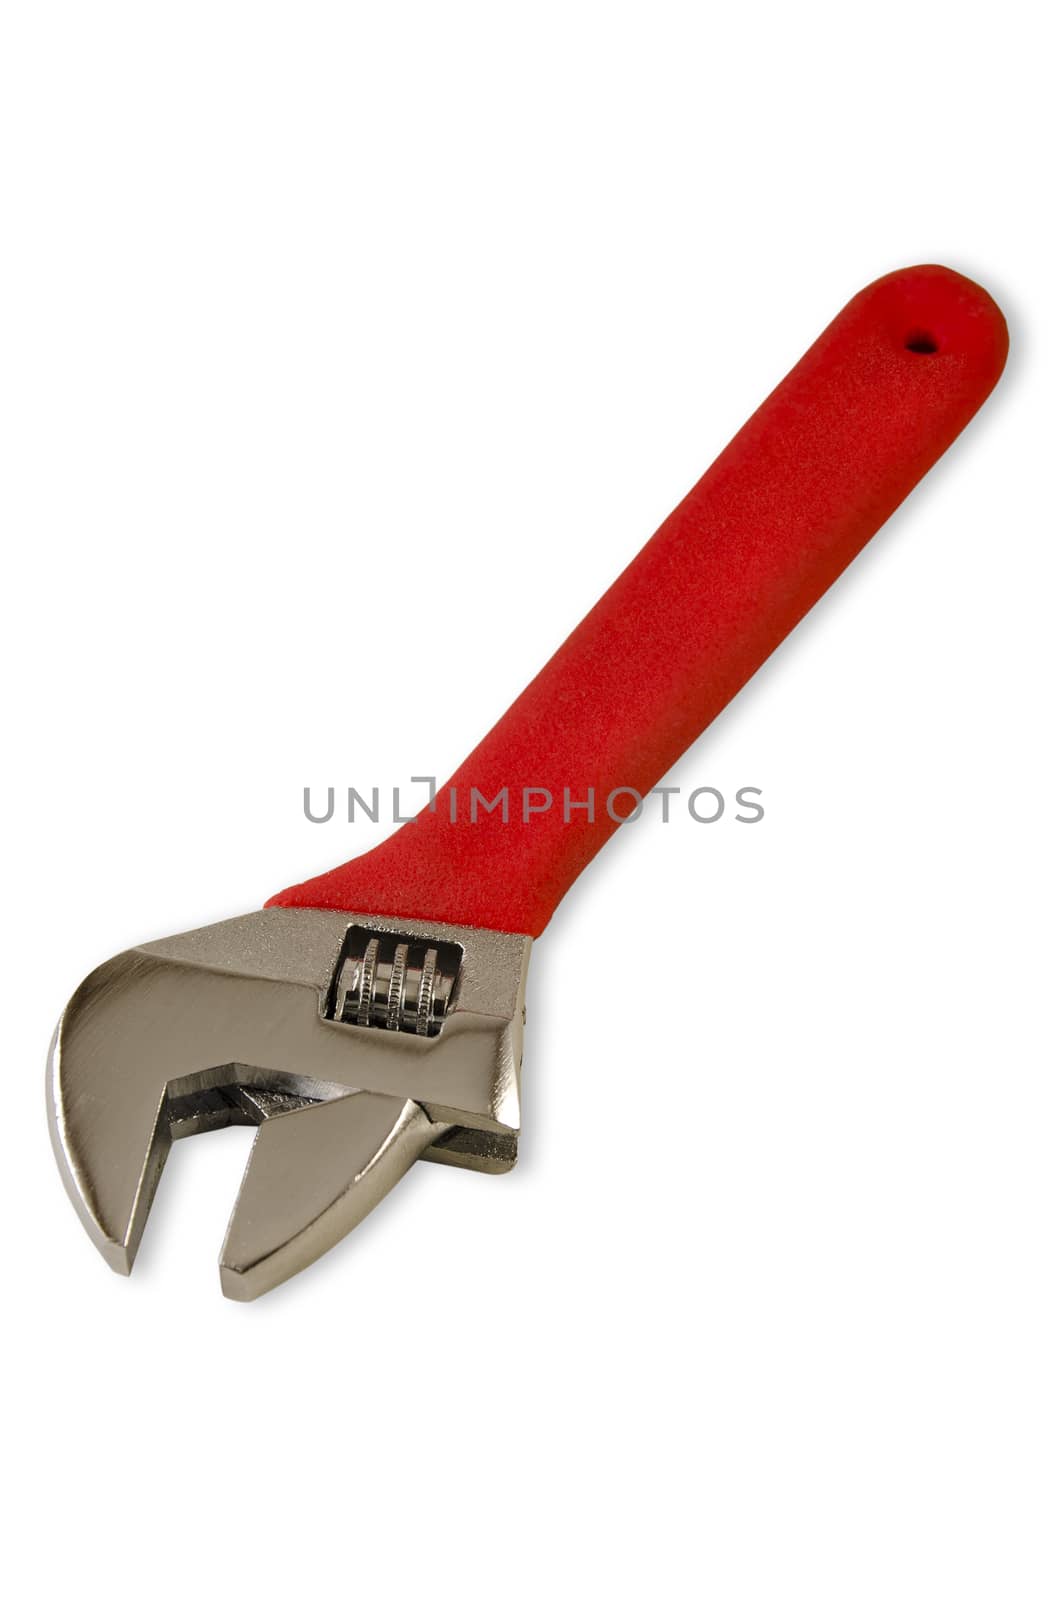 Red handle wrench isolated on white background